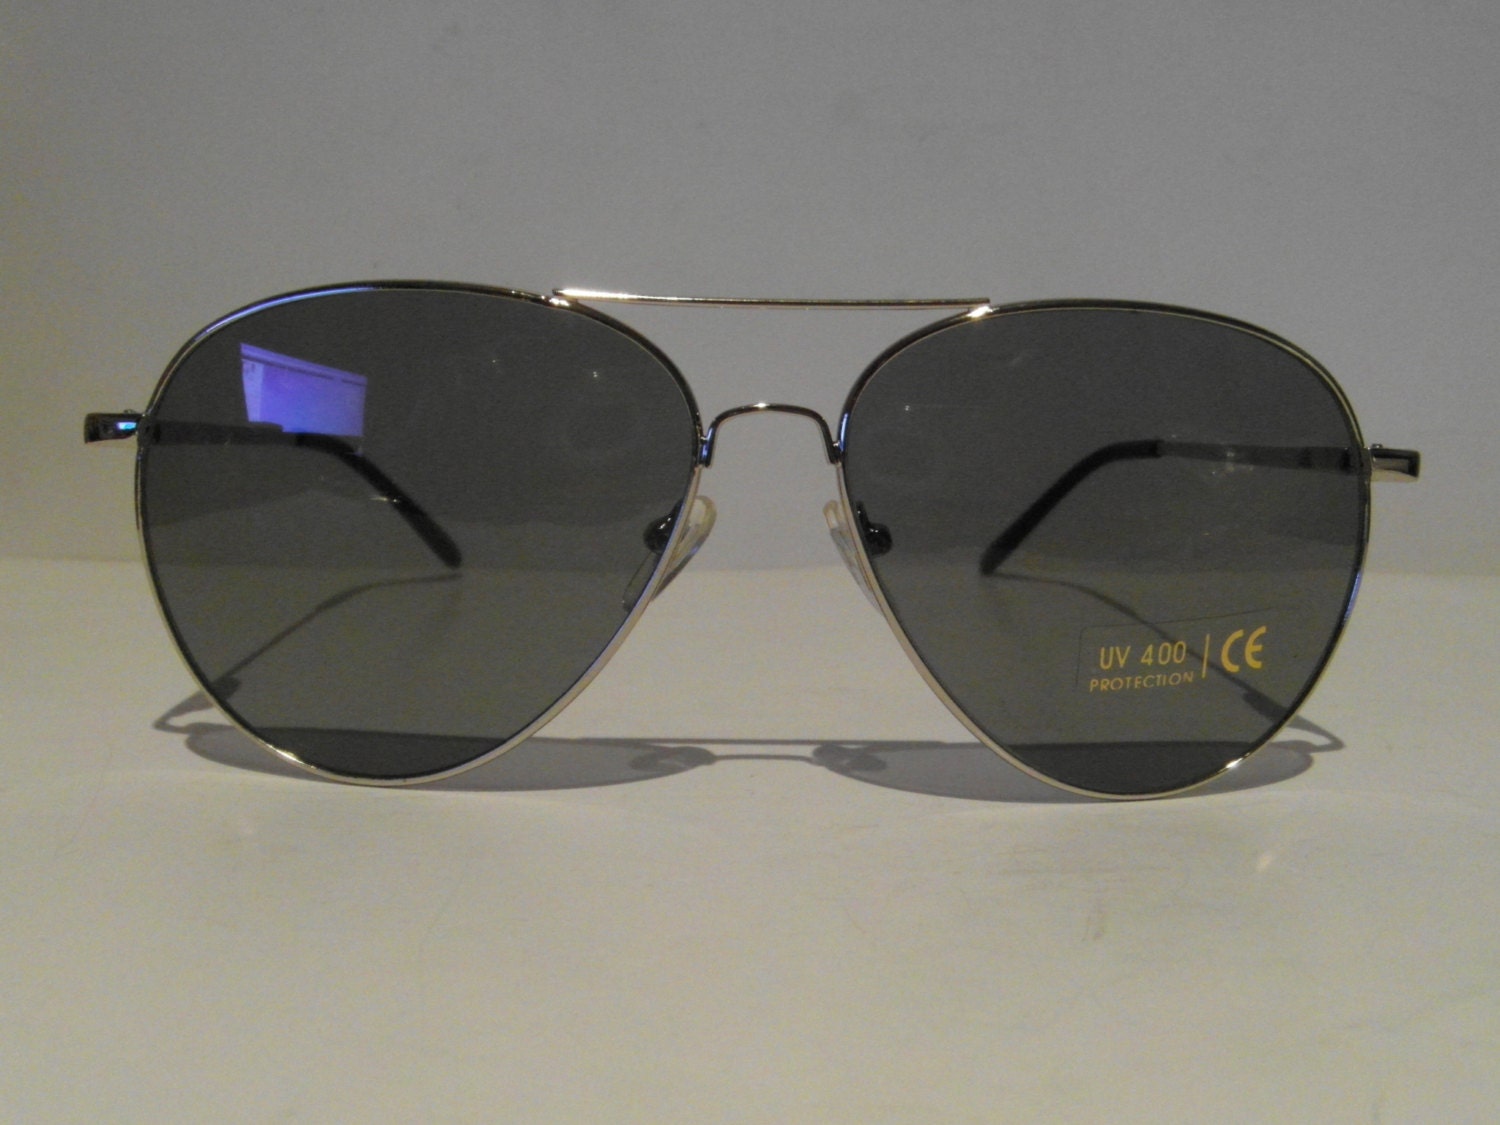 The Real McCoy's Aviator Sunglasses - Gold